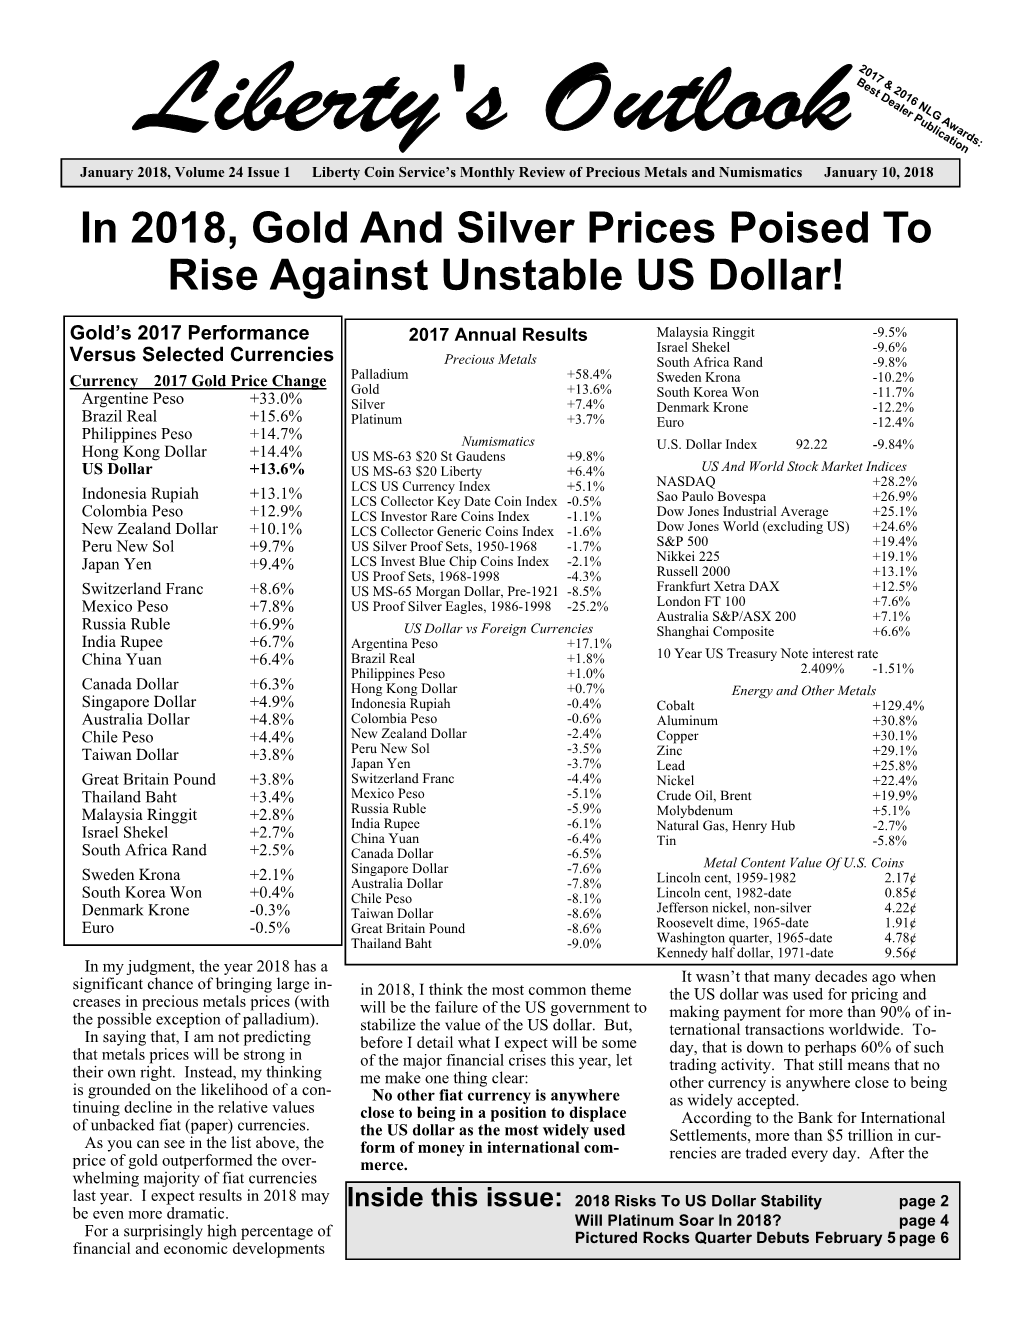 In 2018, Gold and Silver Prices Poised to Rise Against Unstable US Dollar!